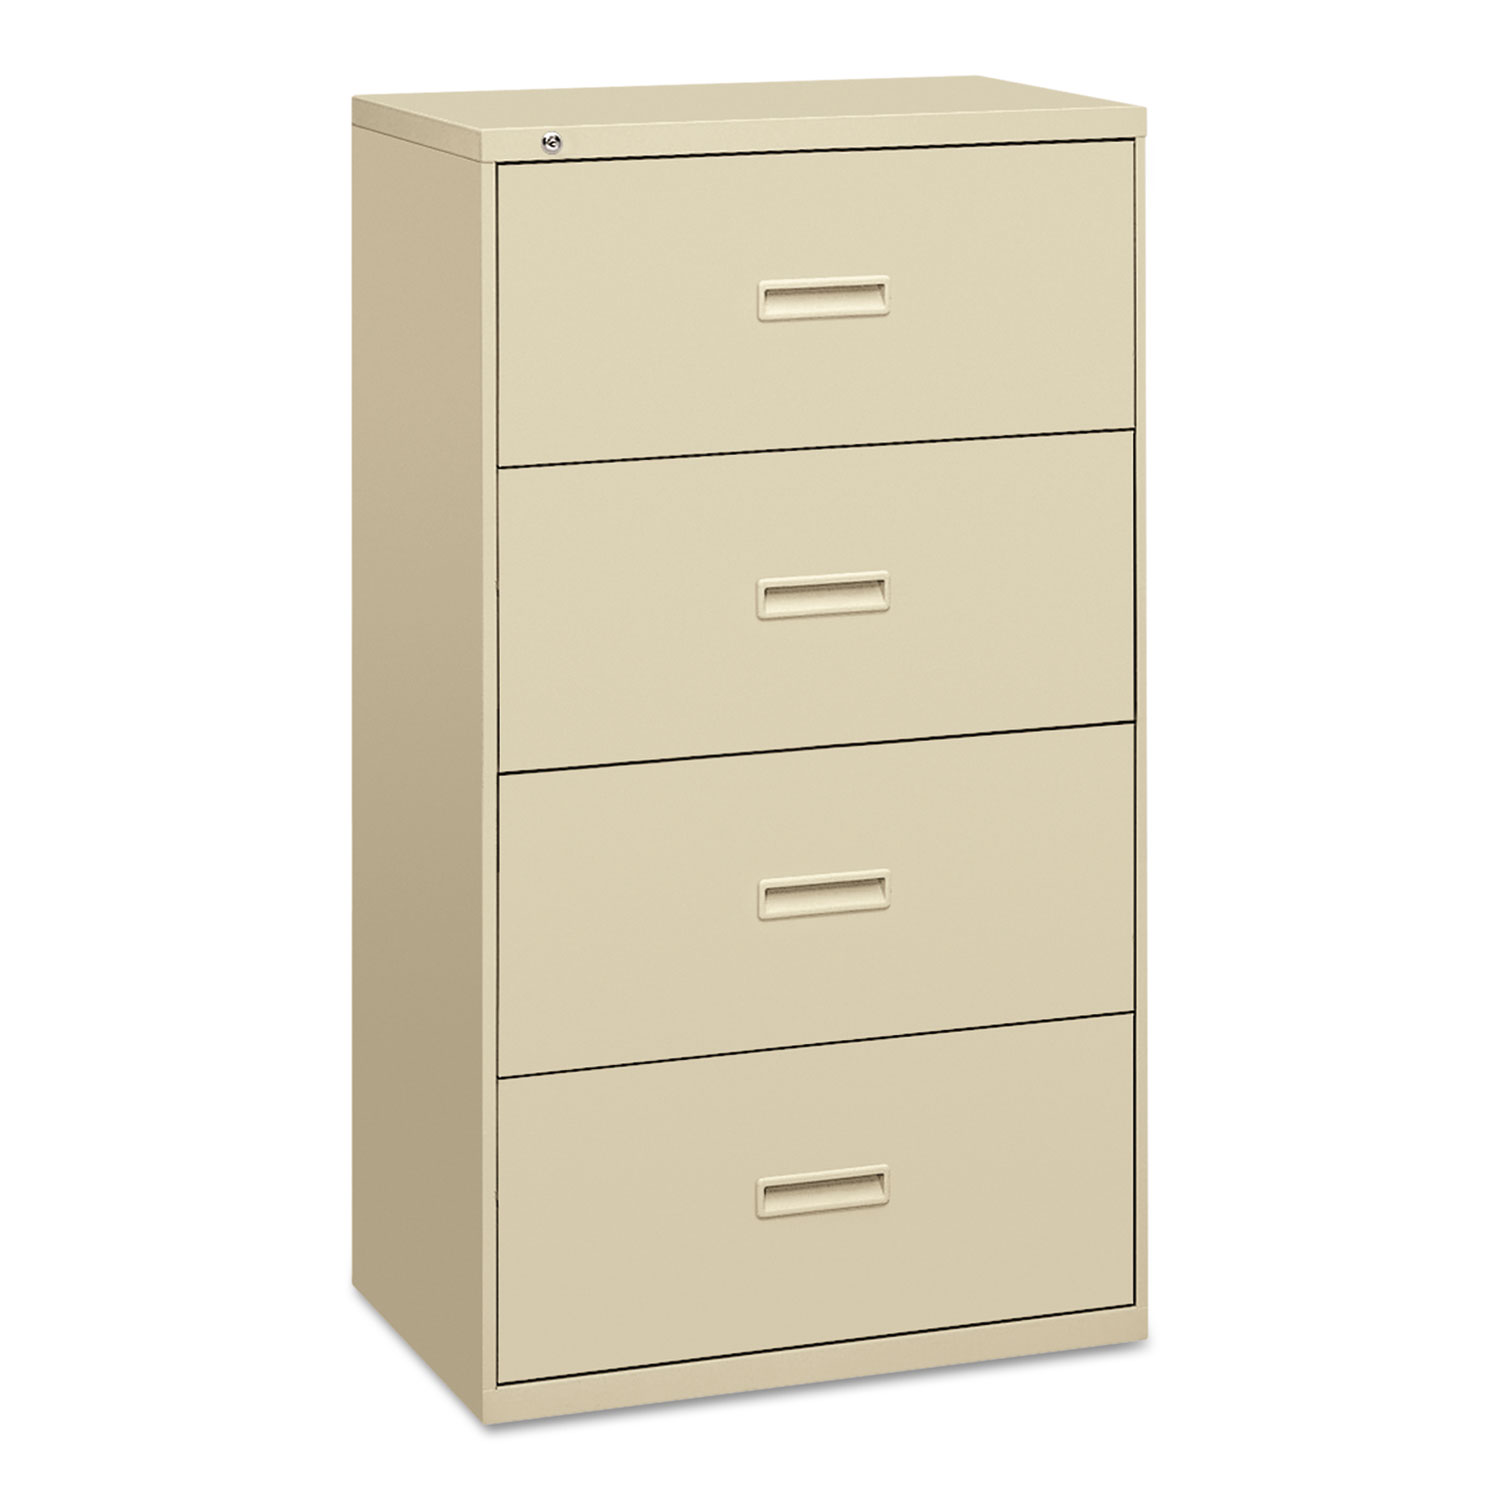 400 Series Four-Drawer Lateral File, 30w x 19-1/4d x 53-1/4h, Putty